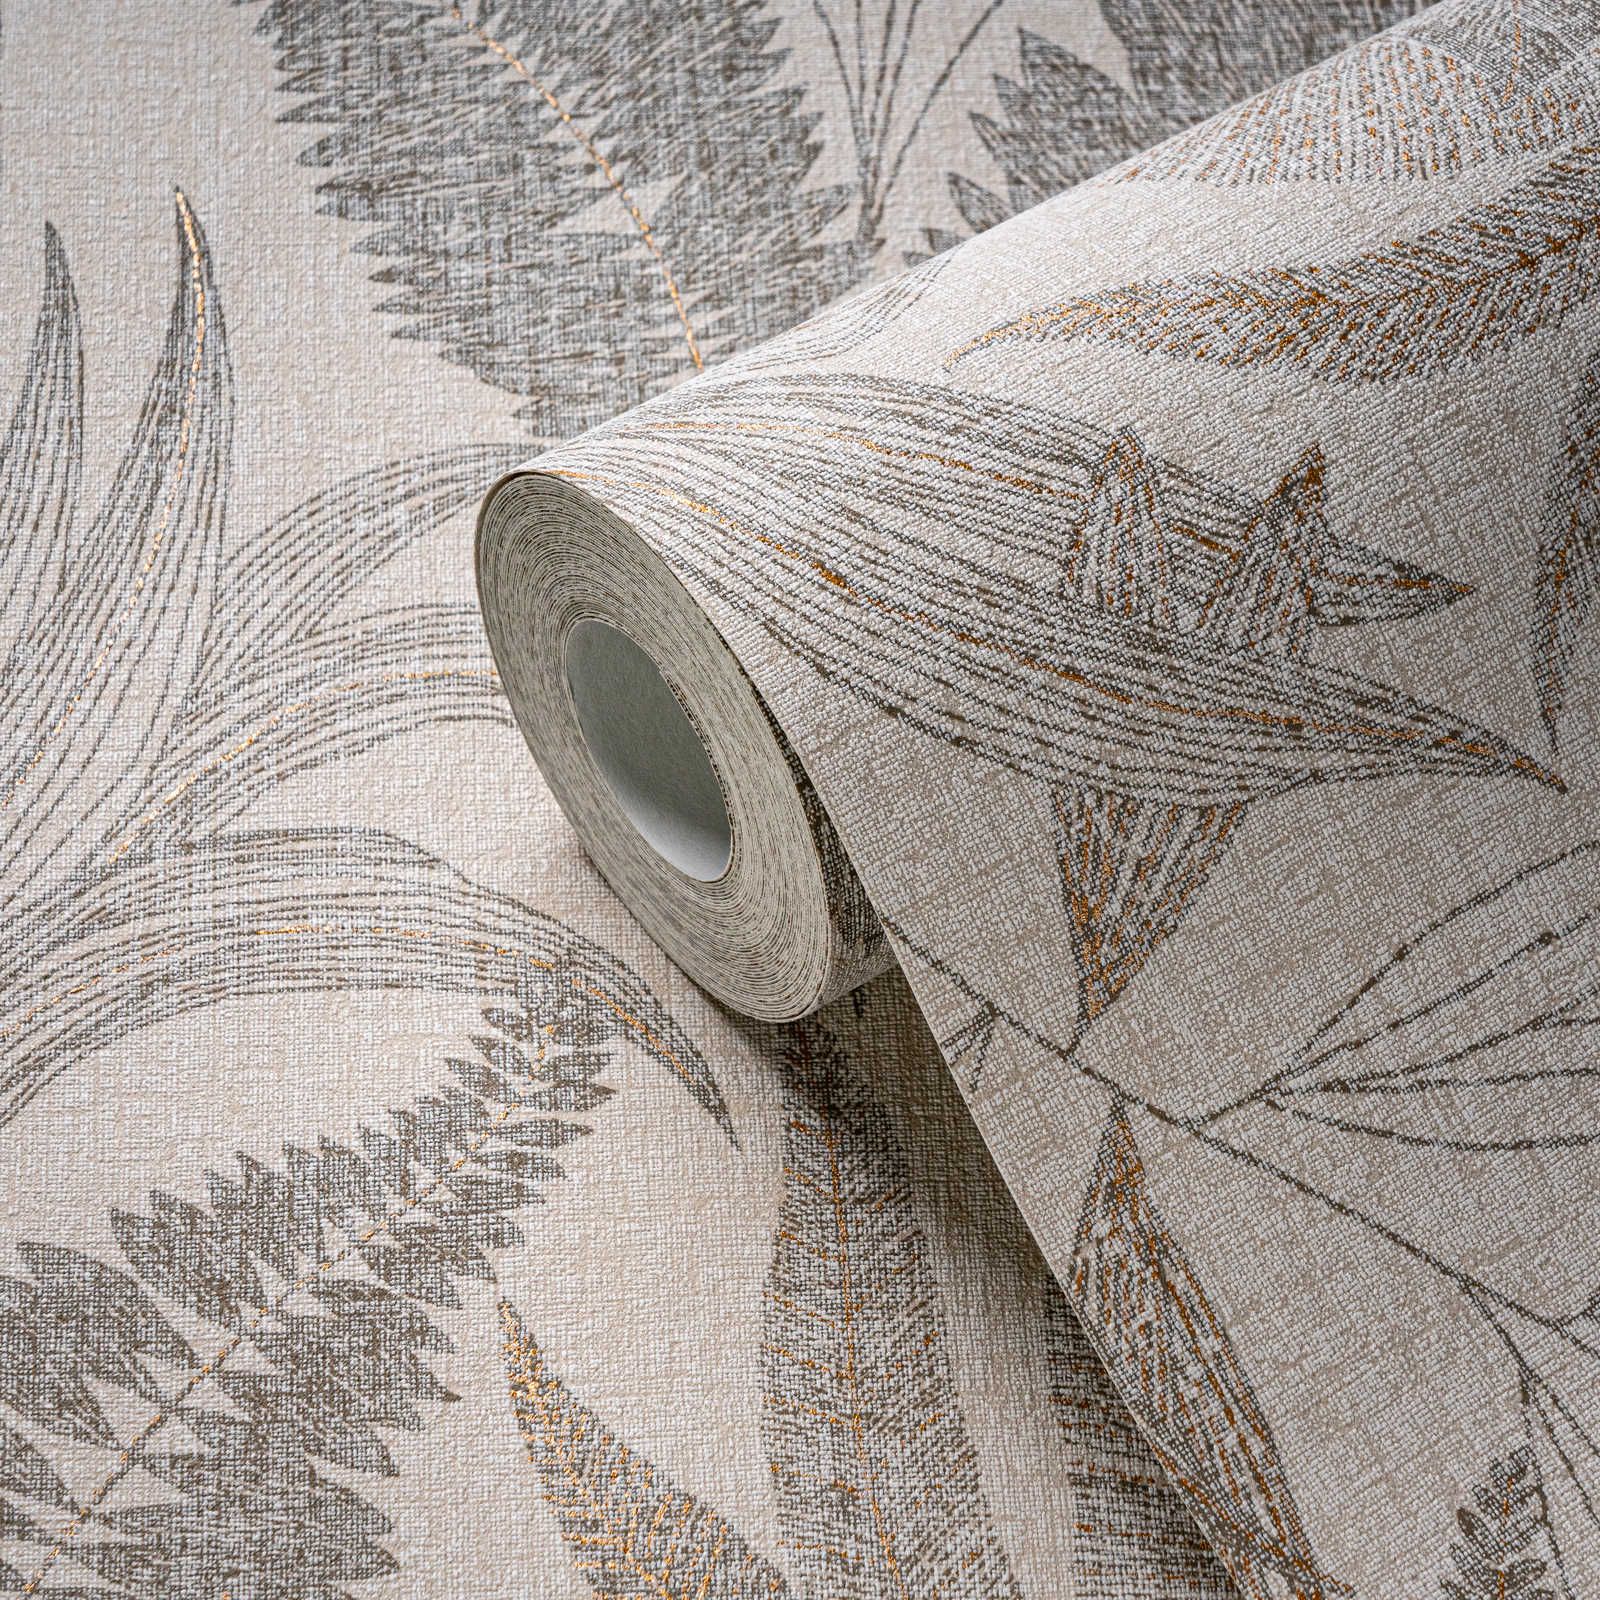             Non-woven wallpaper with large leaf pattern, lightly textured - beige, gold
        